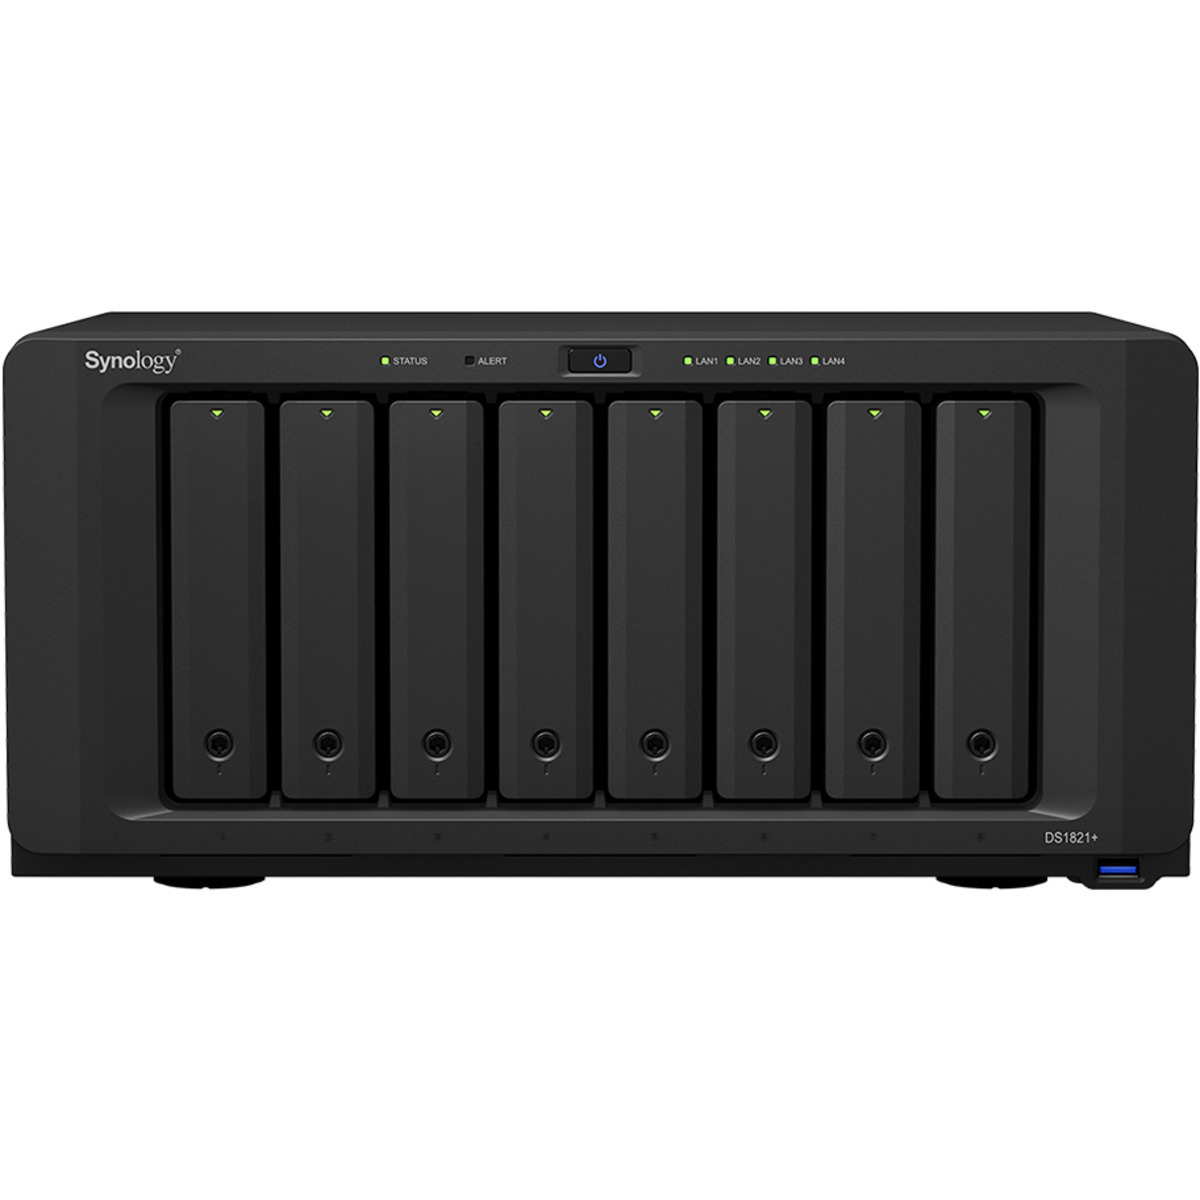 Synology DiskStation DS1821+ 70tb 8-Bay Desktop Multimedia / Power User / Business NAS - Network Attached Storage Device 7x10tb Seagate IronWolf Pro ST10000NT001 3.5 7200rpm SATA 6Gb/s HDD NAS Class Drives Installed - Burn-In Tested - ON SALE - FREE RAM UPGRADE DiskStation DS1821+